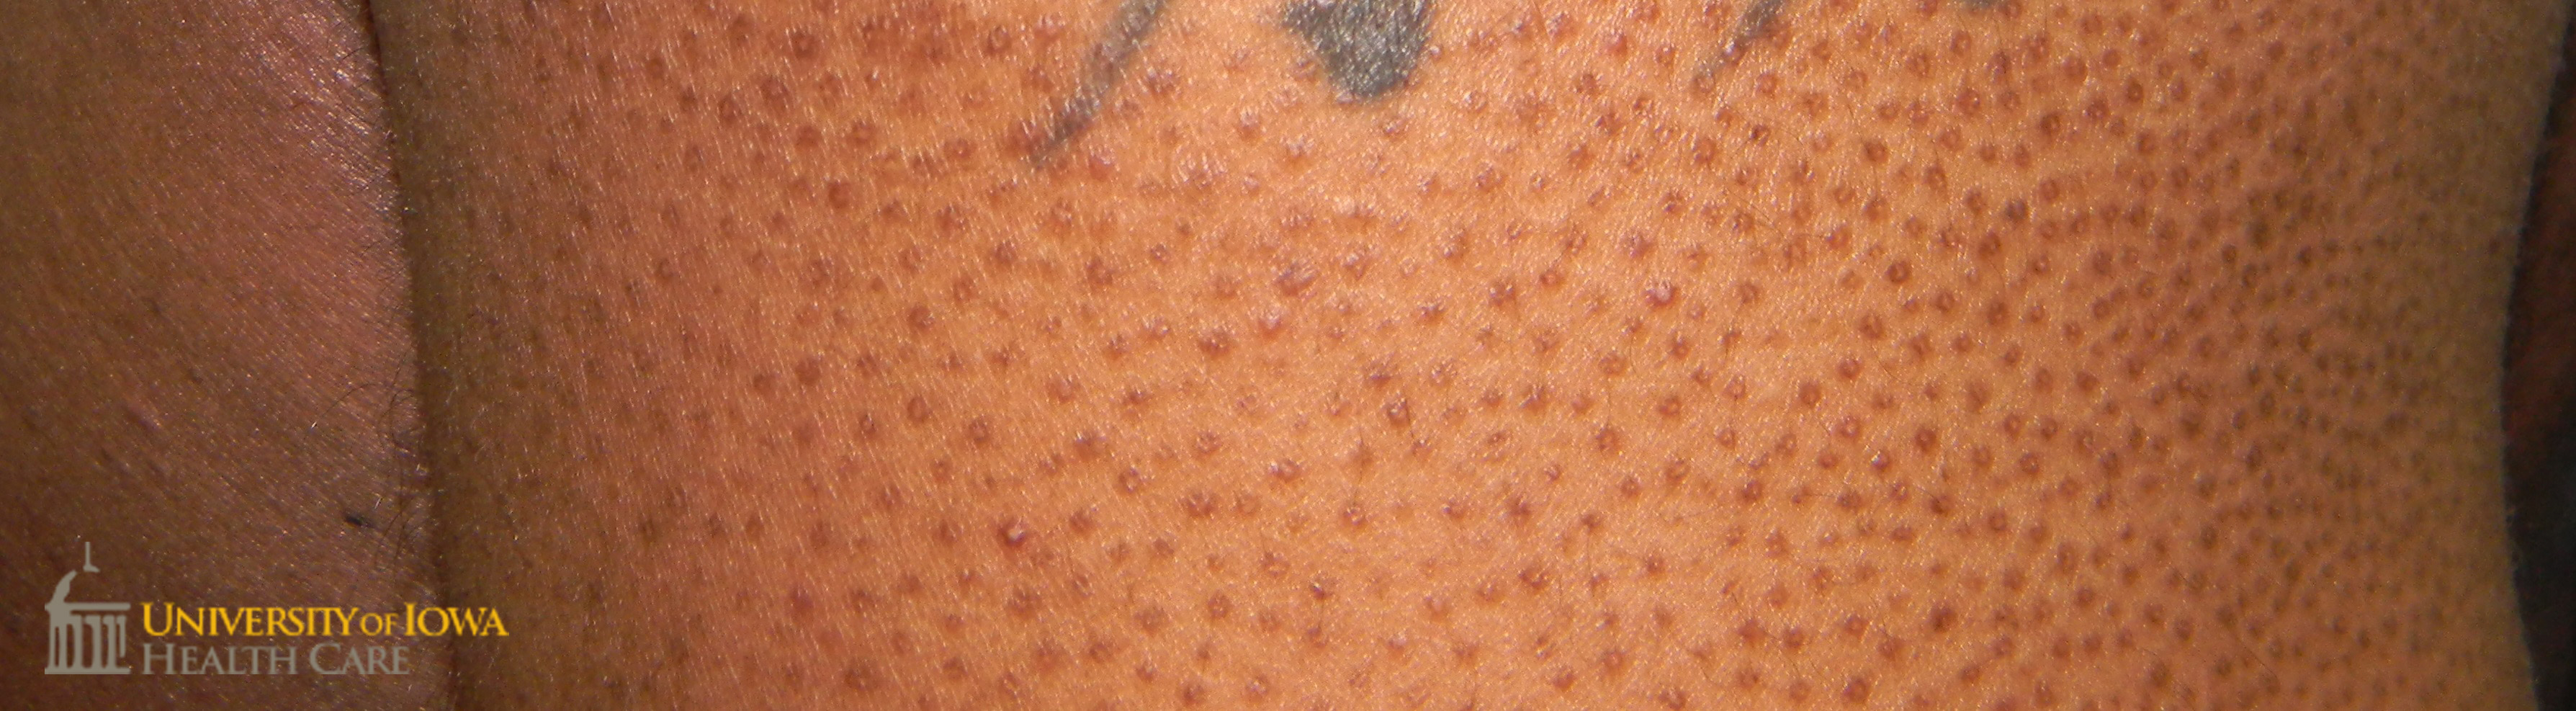 Diffuse follicular-based papules on the arm. (click images for higher resolution).